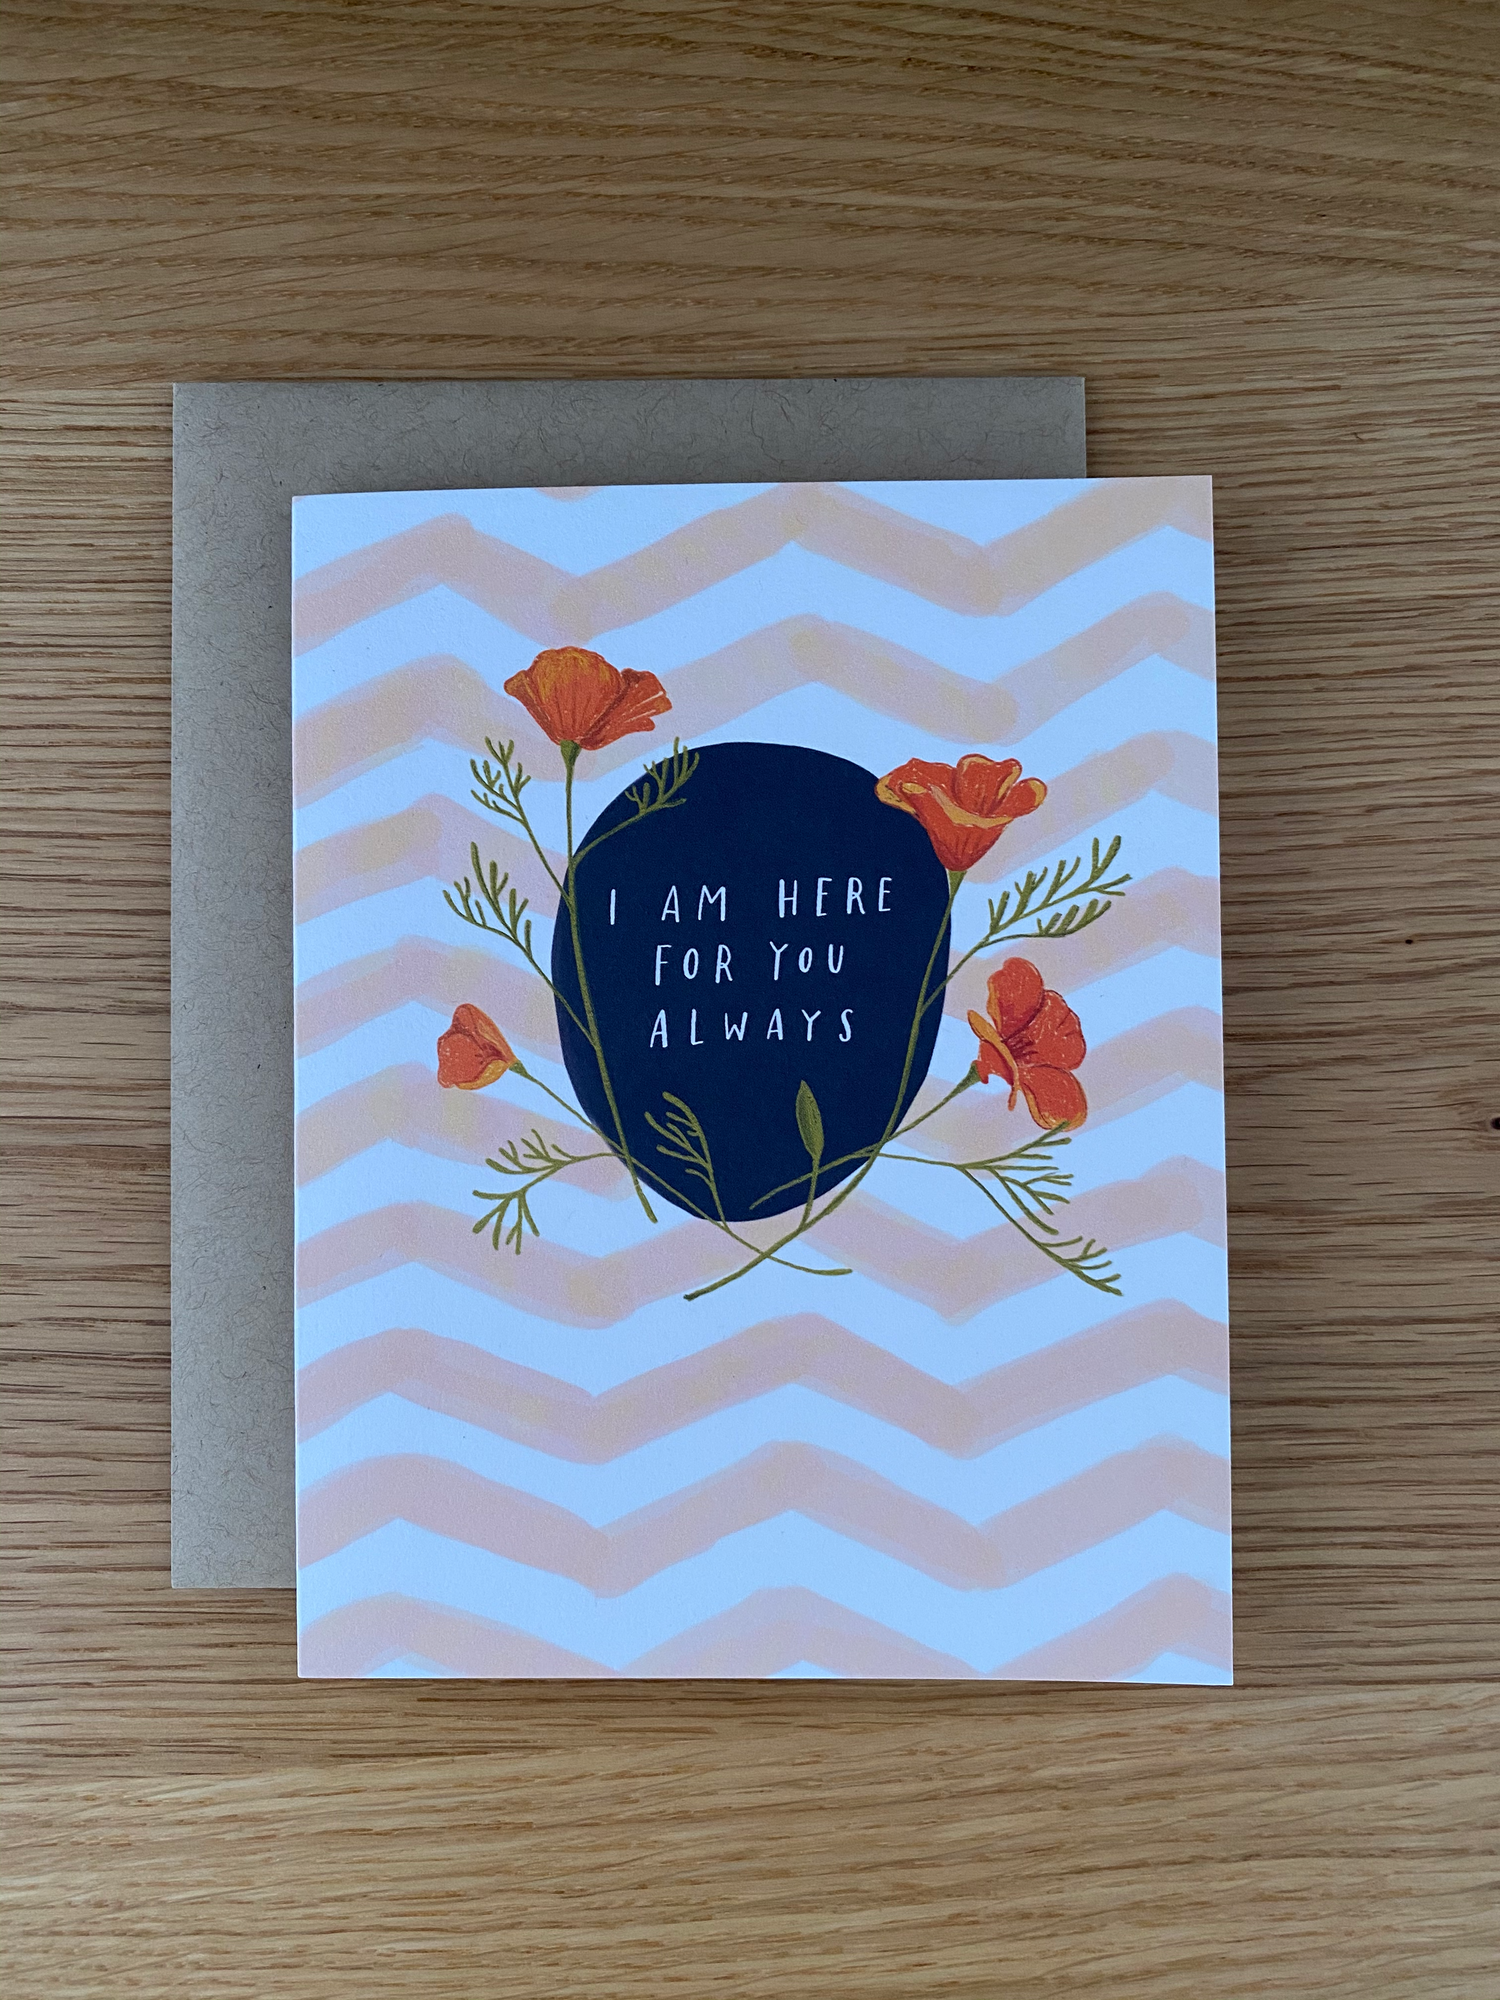 I'm Here for you always white and orange poppy card by Emily McDowell